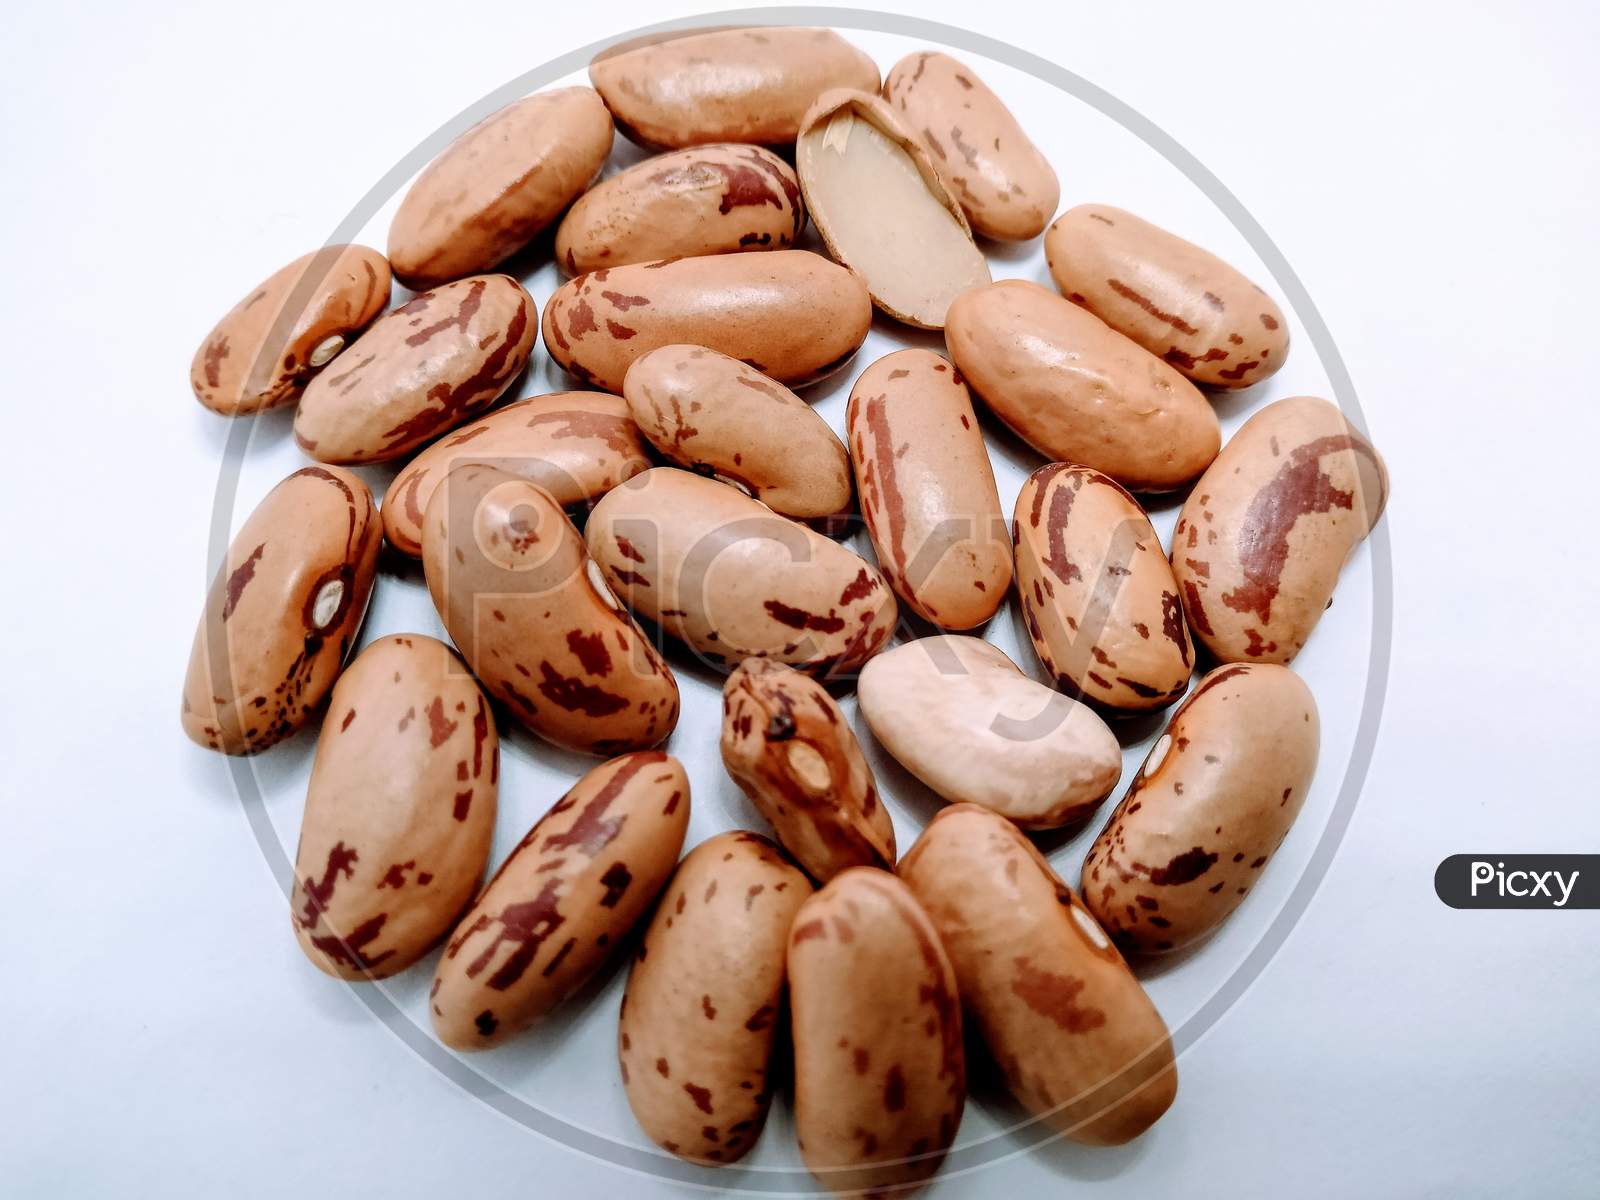 Kidney Beans Over an Isolated White Background